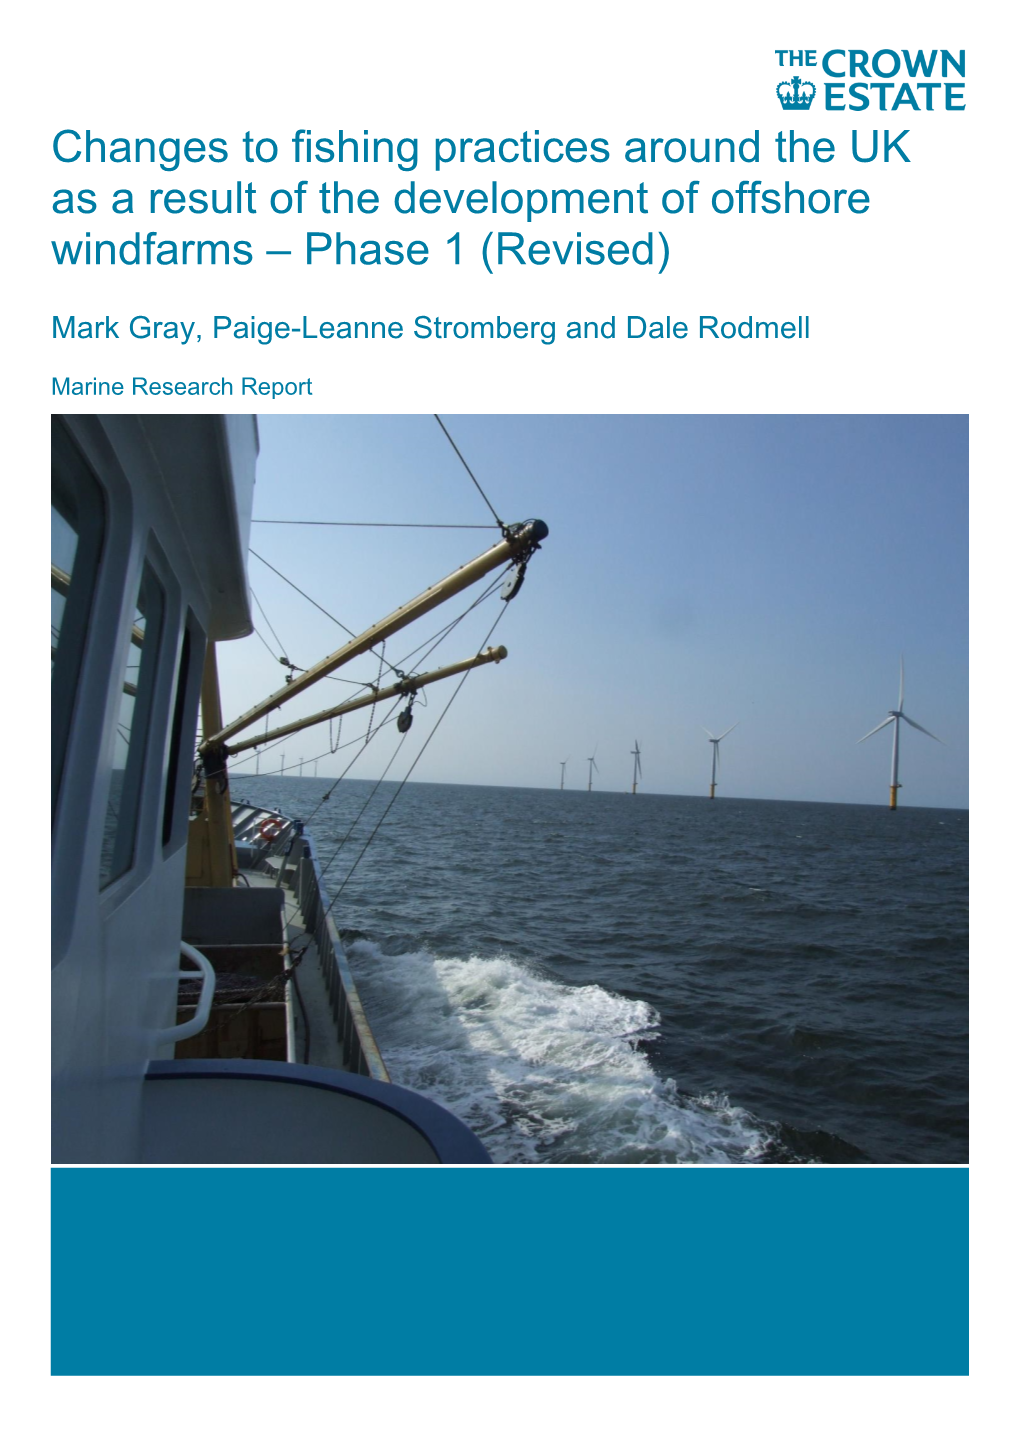 Changes to Fishing Practices Around the UK As a Result of the Development of Offshore Windfarms – Phase 1 (Revised)